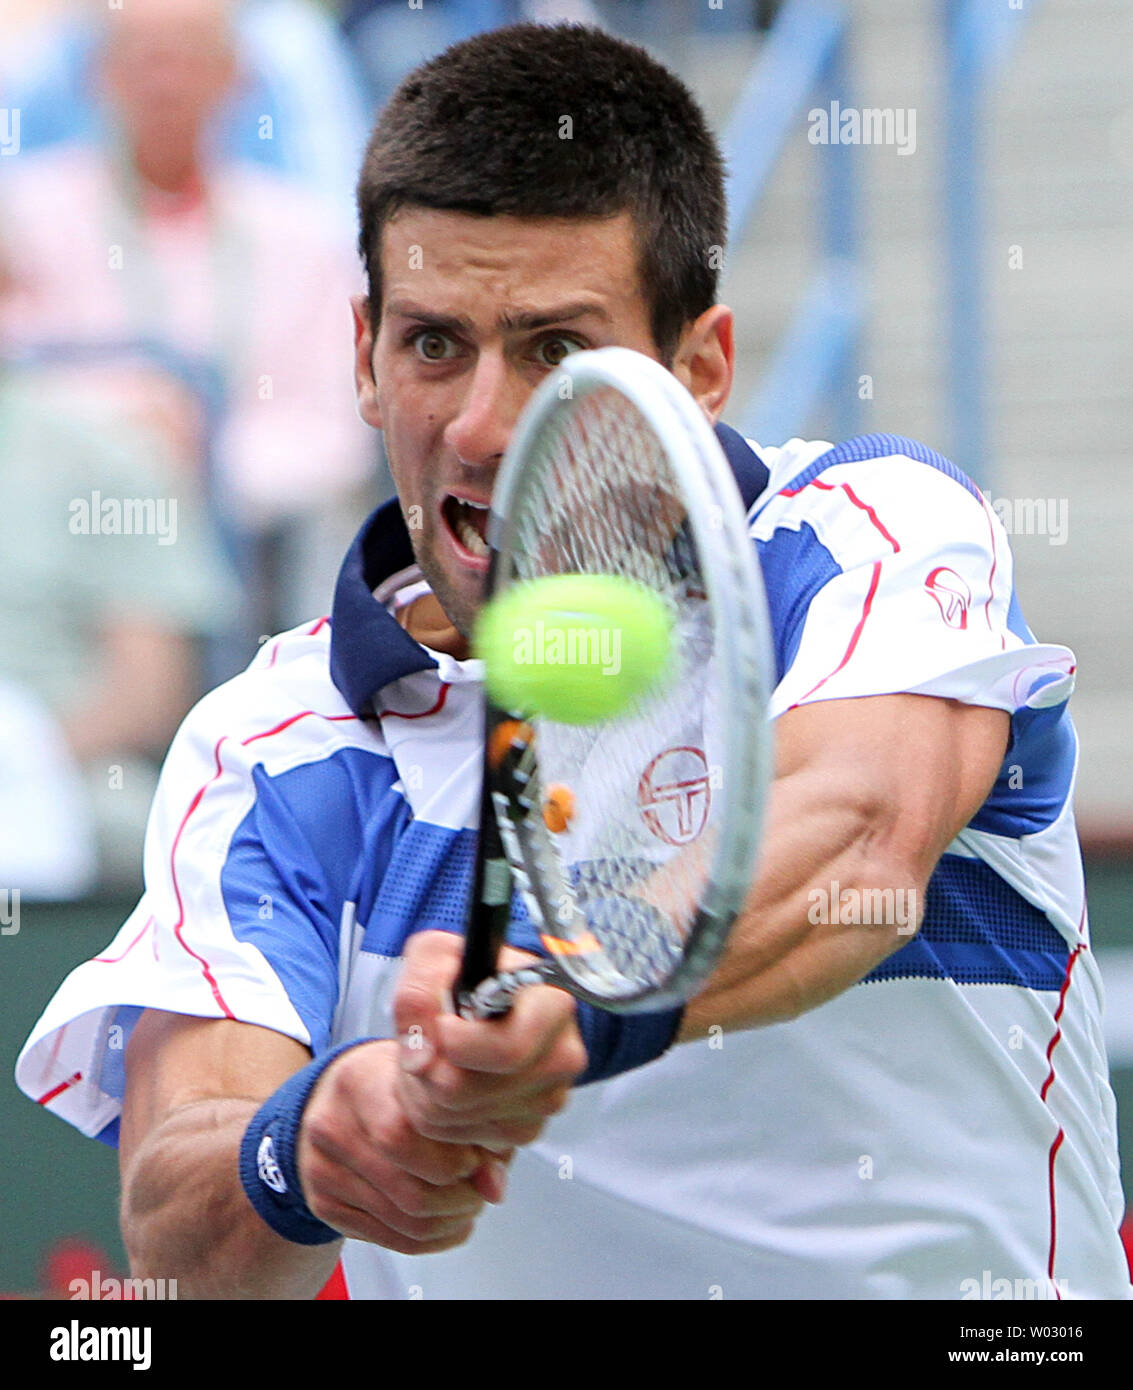 Serbian Novak Djokovic hits a shot during his mens final match against Spaniard Rafael Nadal at the BNP Paribas Open in Indian Wells, California on March 20, 2011.  Djokovic defeated Nadal 4-6, 6-3, 6-2 to win the tournament.   UPI/David Silpa Stock Photo